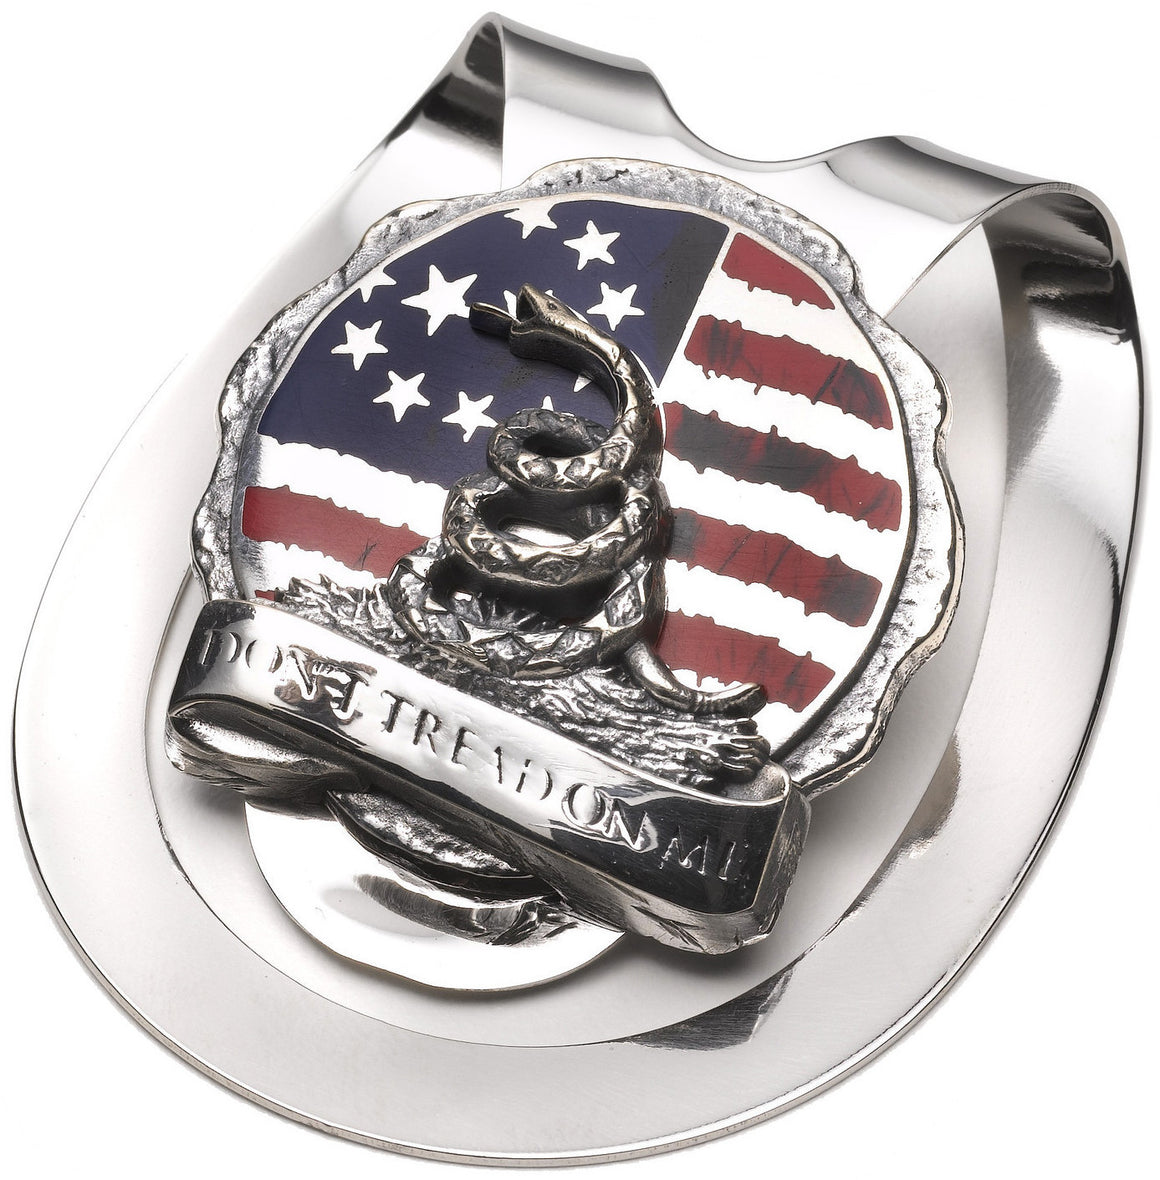 Don't Tread On Me Sterling Silver Money Clip - The Great Republic